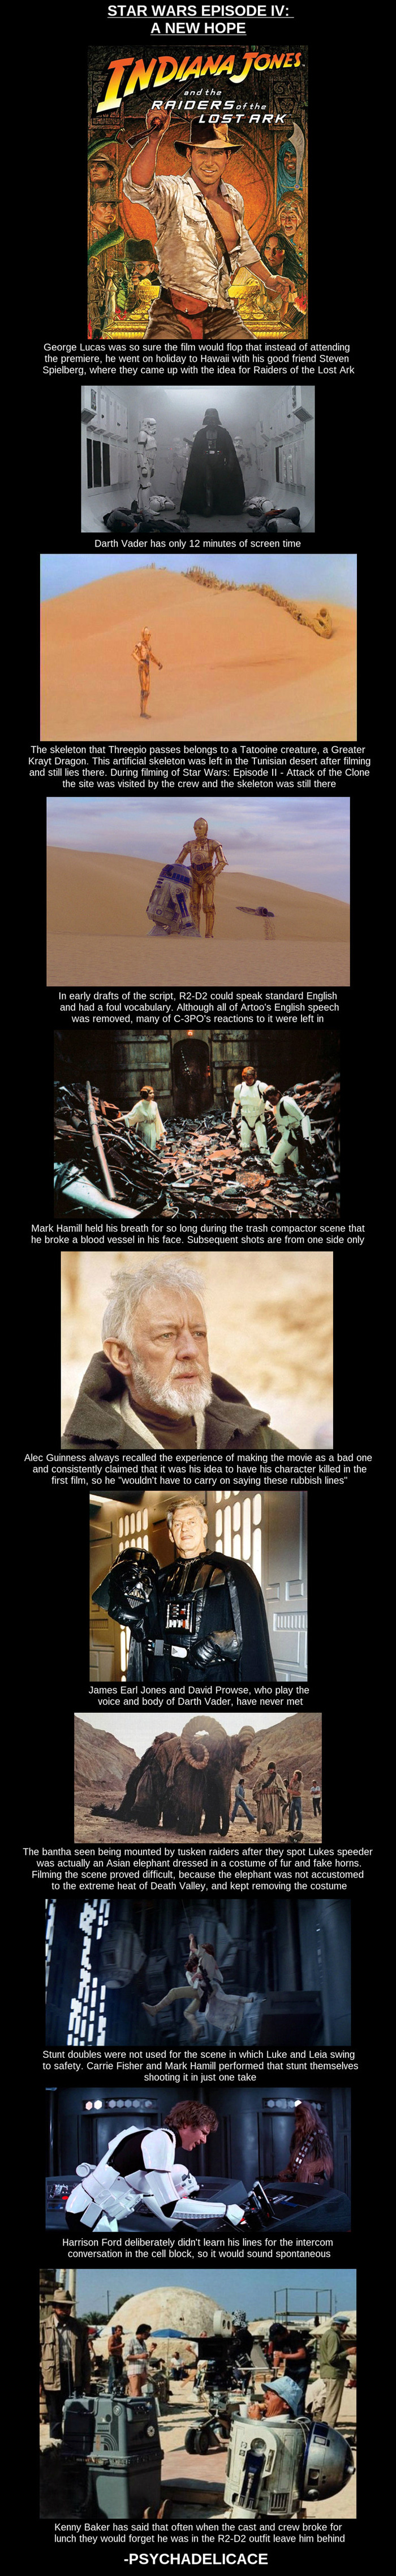 Star Wars Episode IV: A New Hope Facts